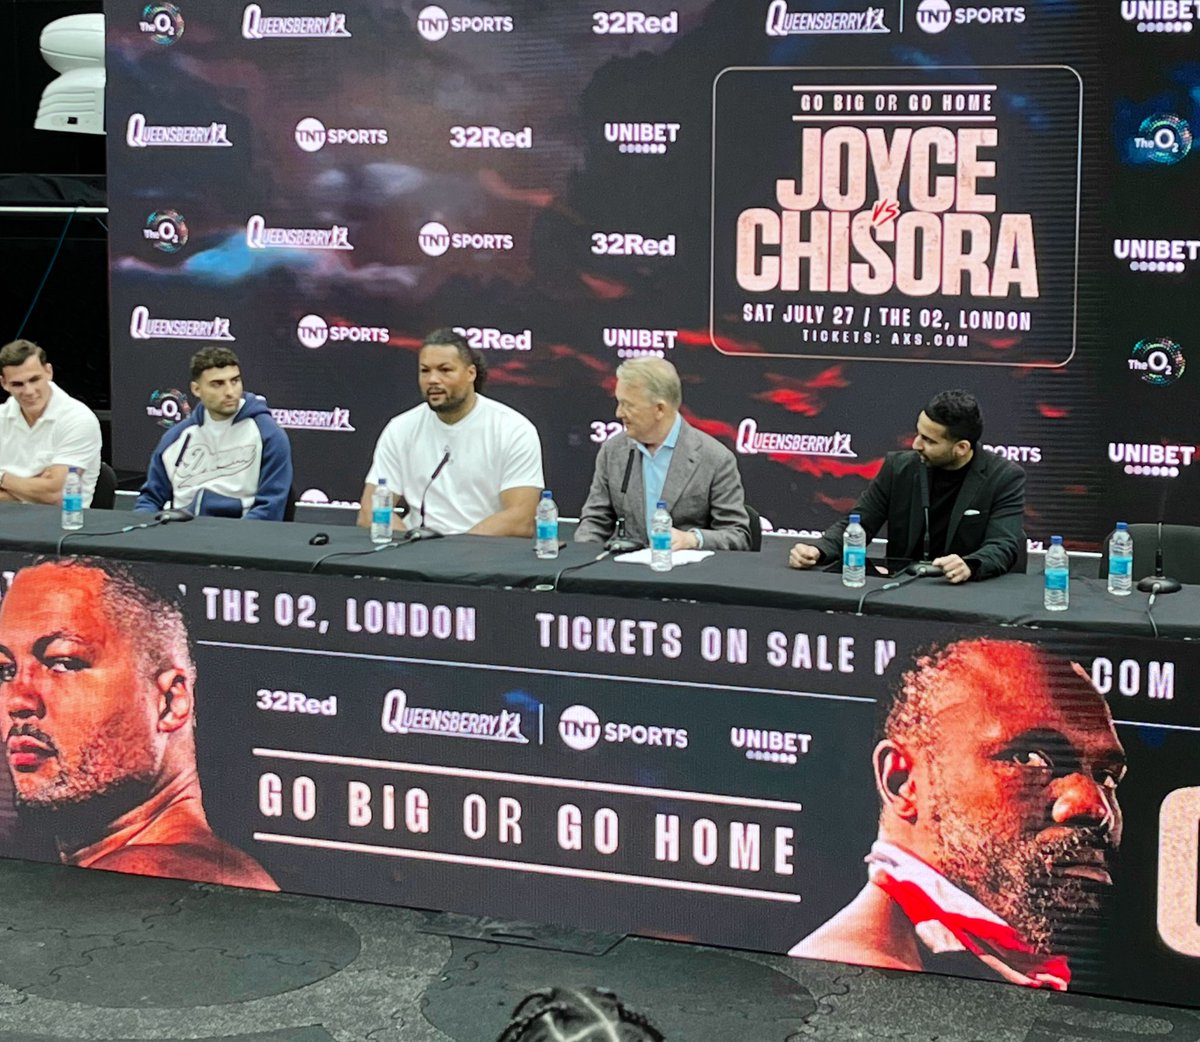 Frank Warren officially announces Joe Joyce vs Derek Chisora for July 27th at The O2 Arena.

He does so without Derek Chisora being present, with everyone having waited since 3pm for his arrival.

Boxing gonna boxing…

#Boxing #JoyceChisora